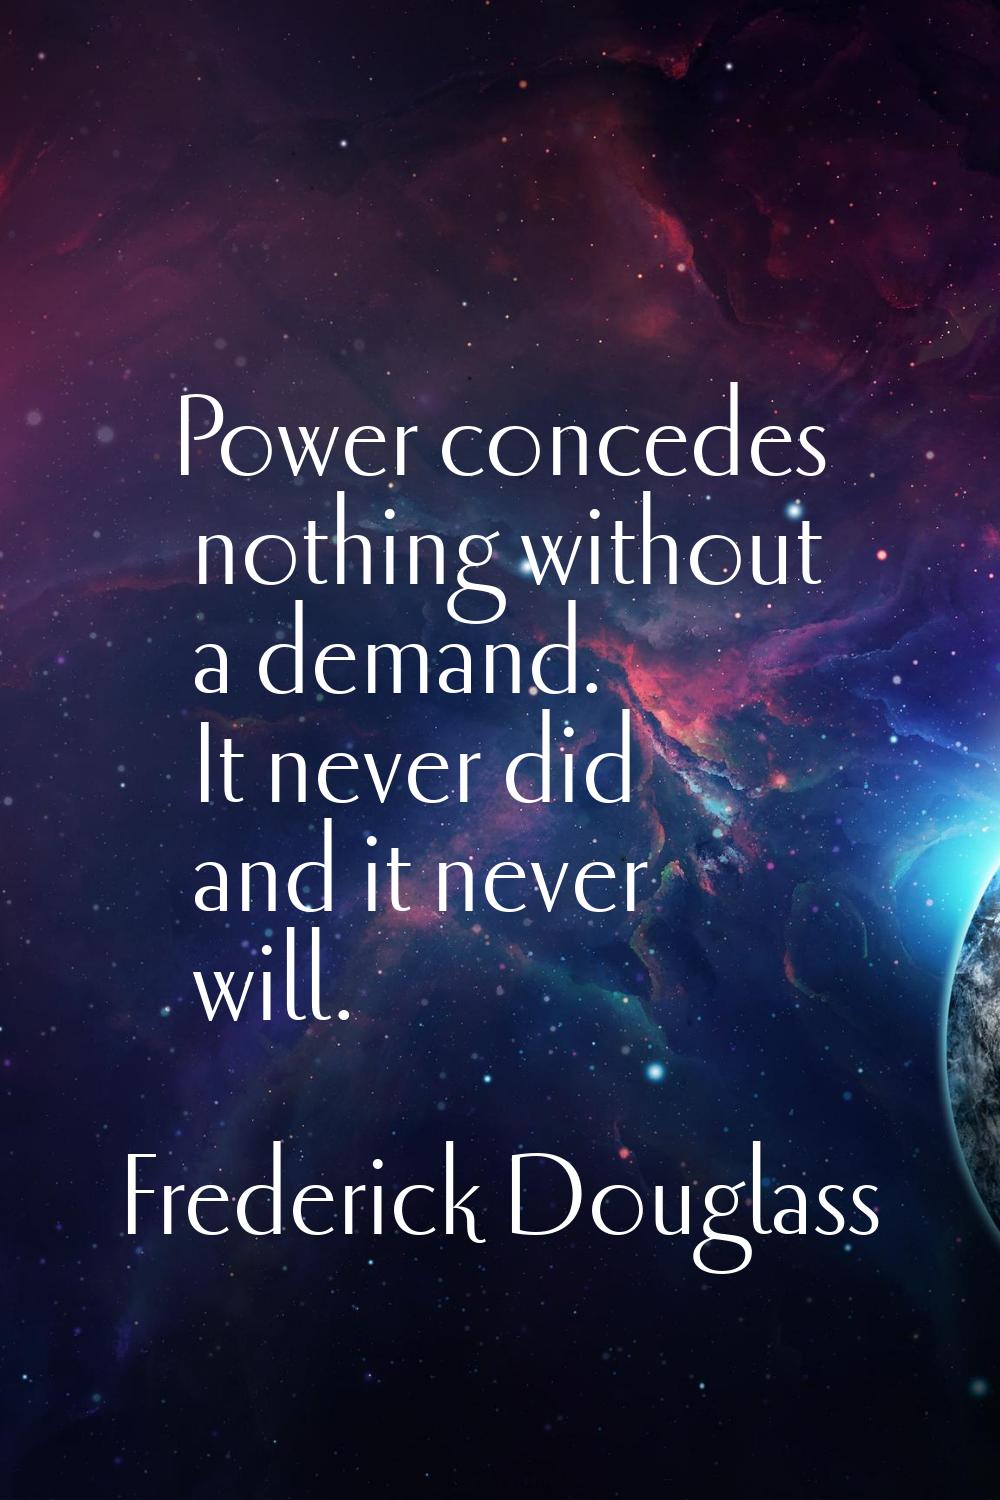 Power concedes nothing without a demand. It never did and it never will.